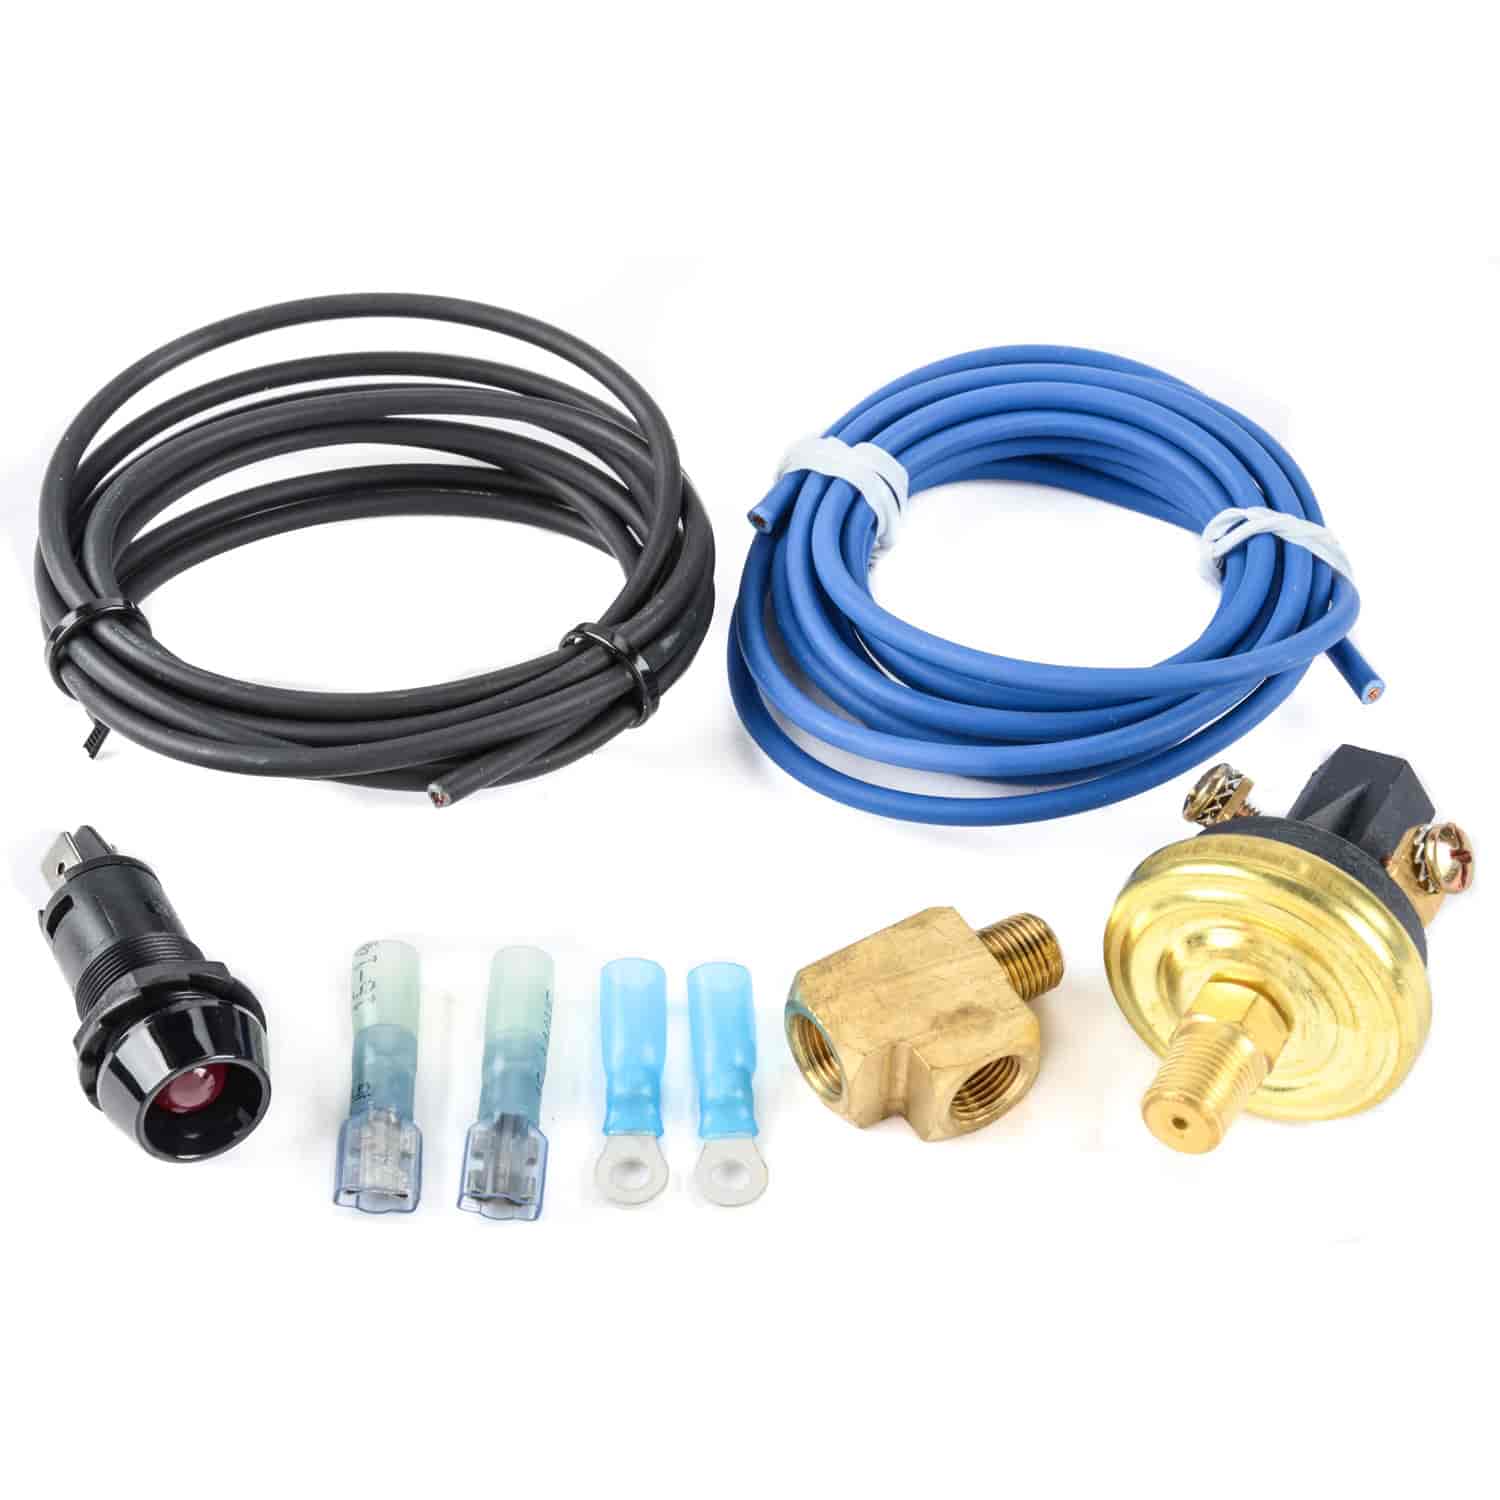 Adjustable Oil Pressure Light Kit Preset to 3 PSI (adjustable from 0.5 to 24 PSI)